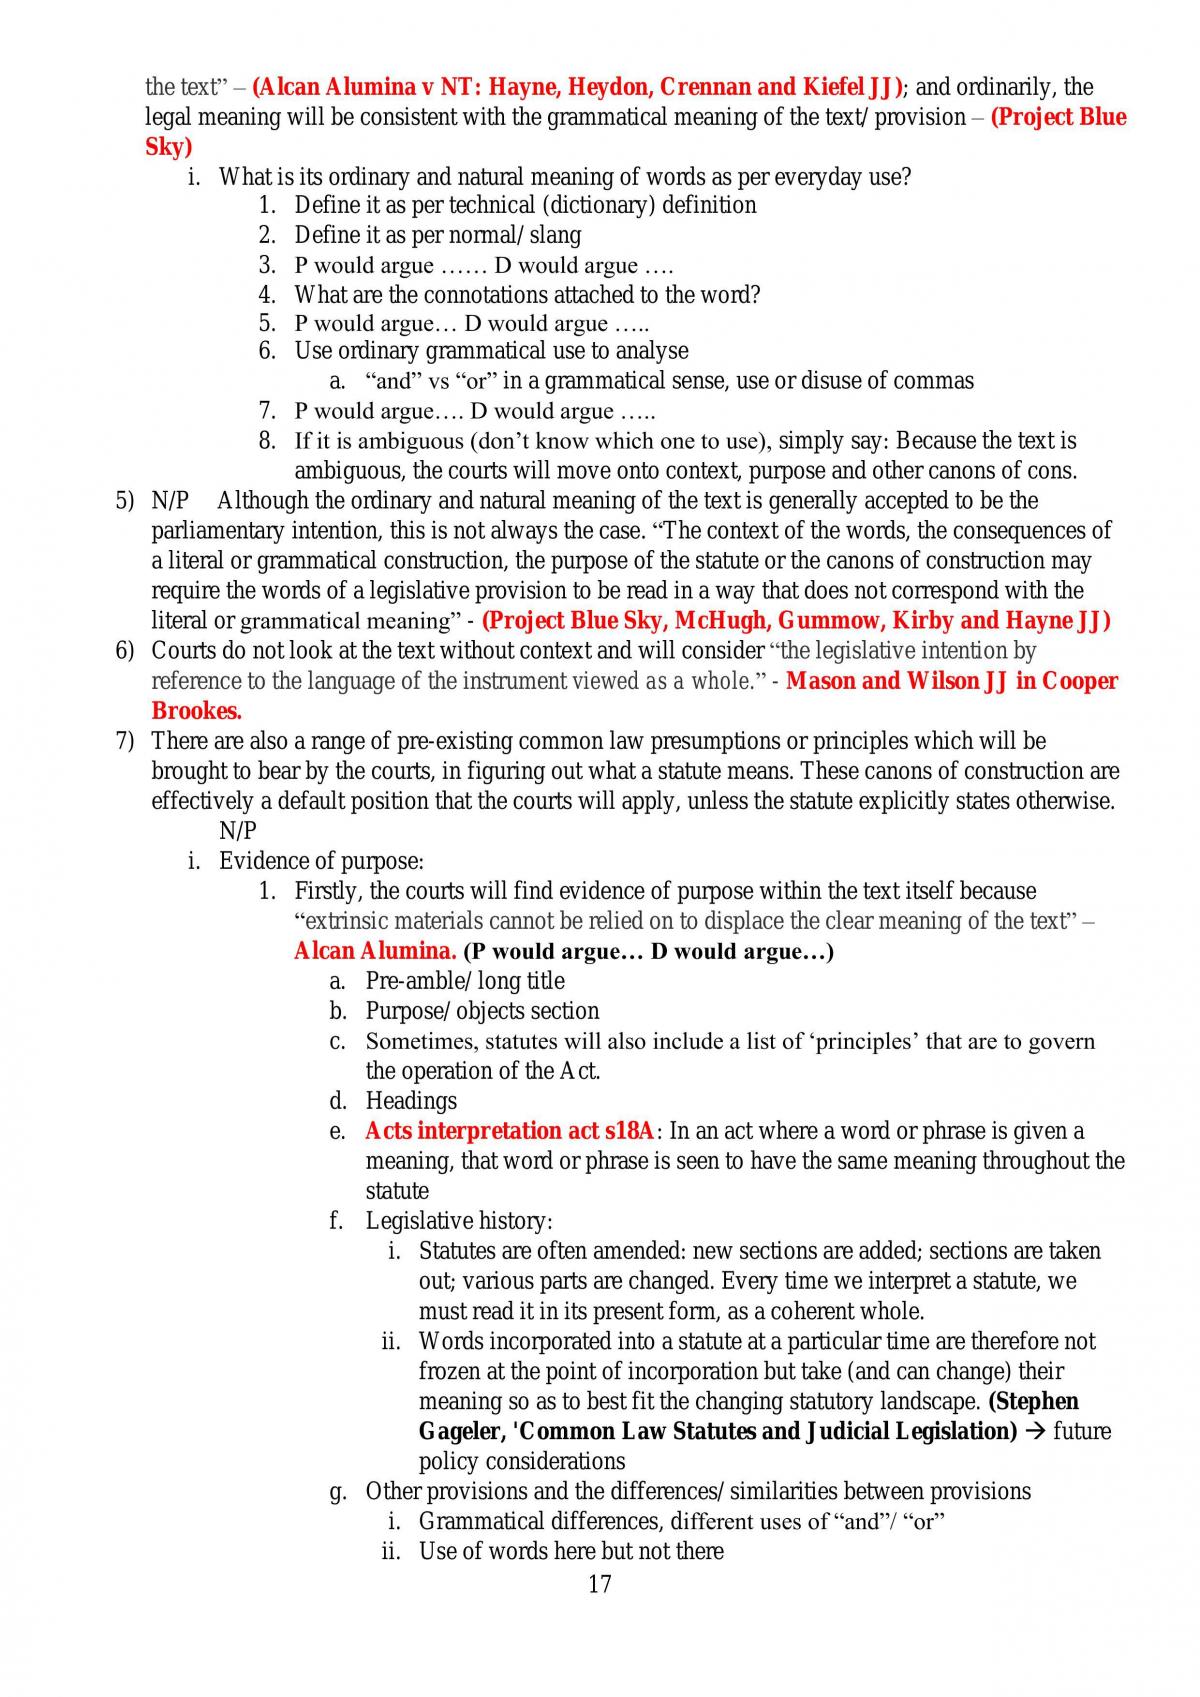 Public Law and Stat Interpretation Exam notes - Page 17